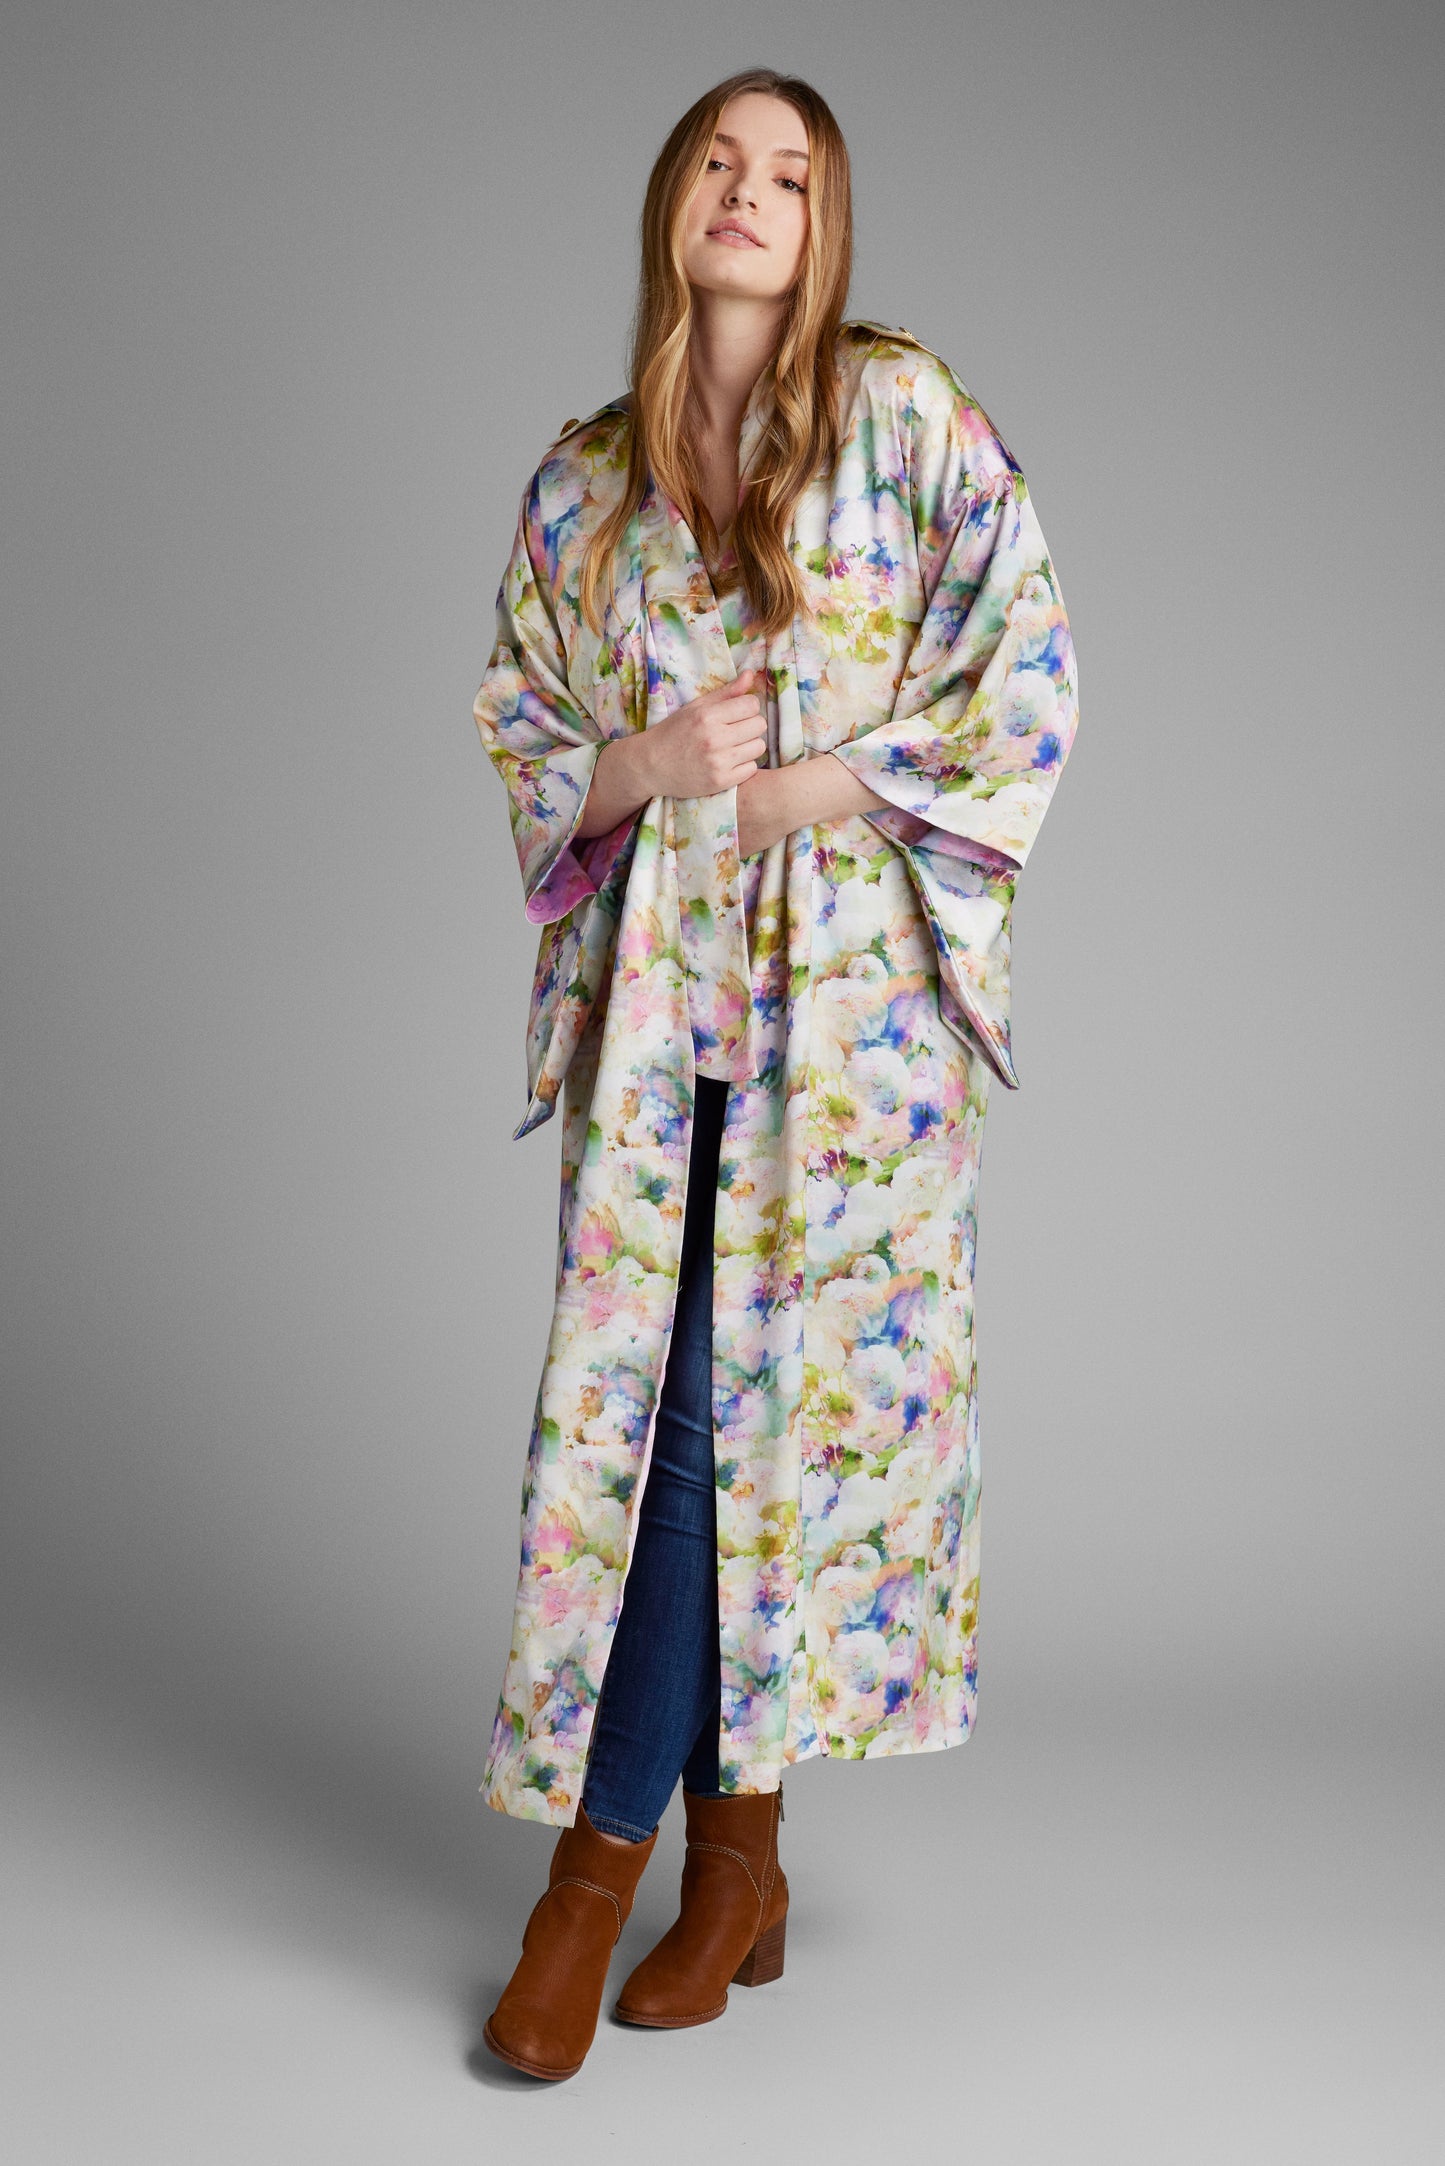 Front profile of woman wearing an all over floral printed kimono duster made from recycled textiles 4